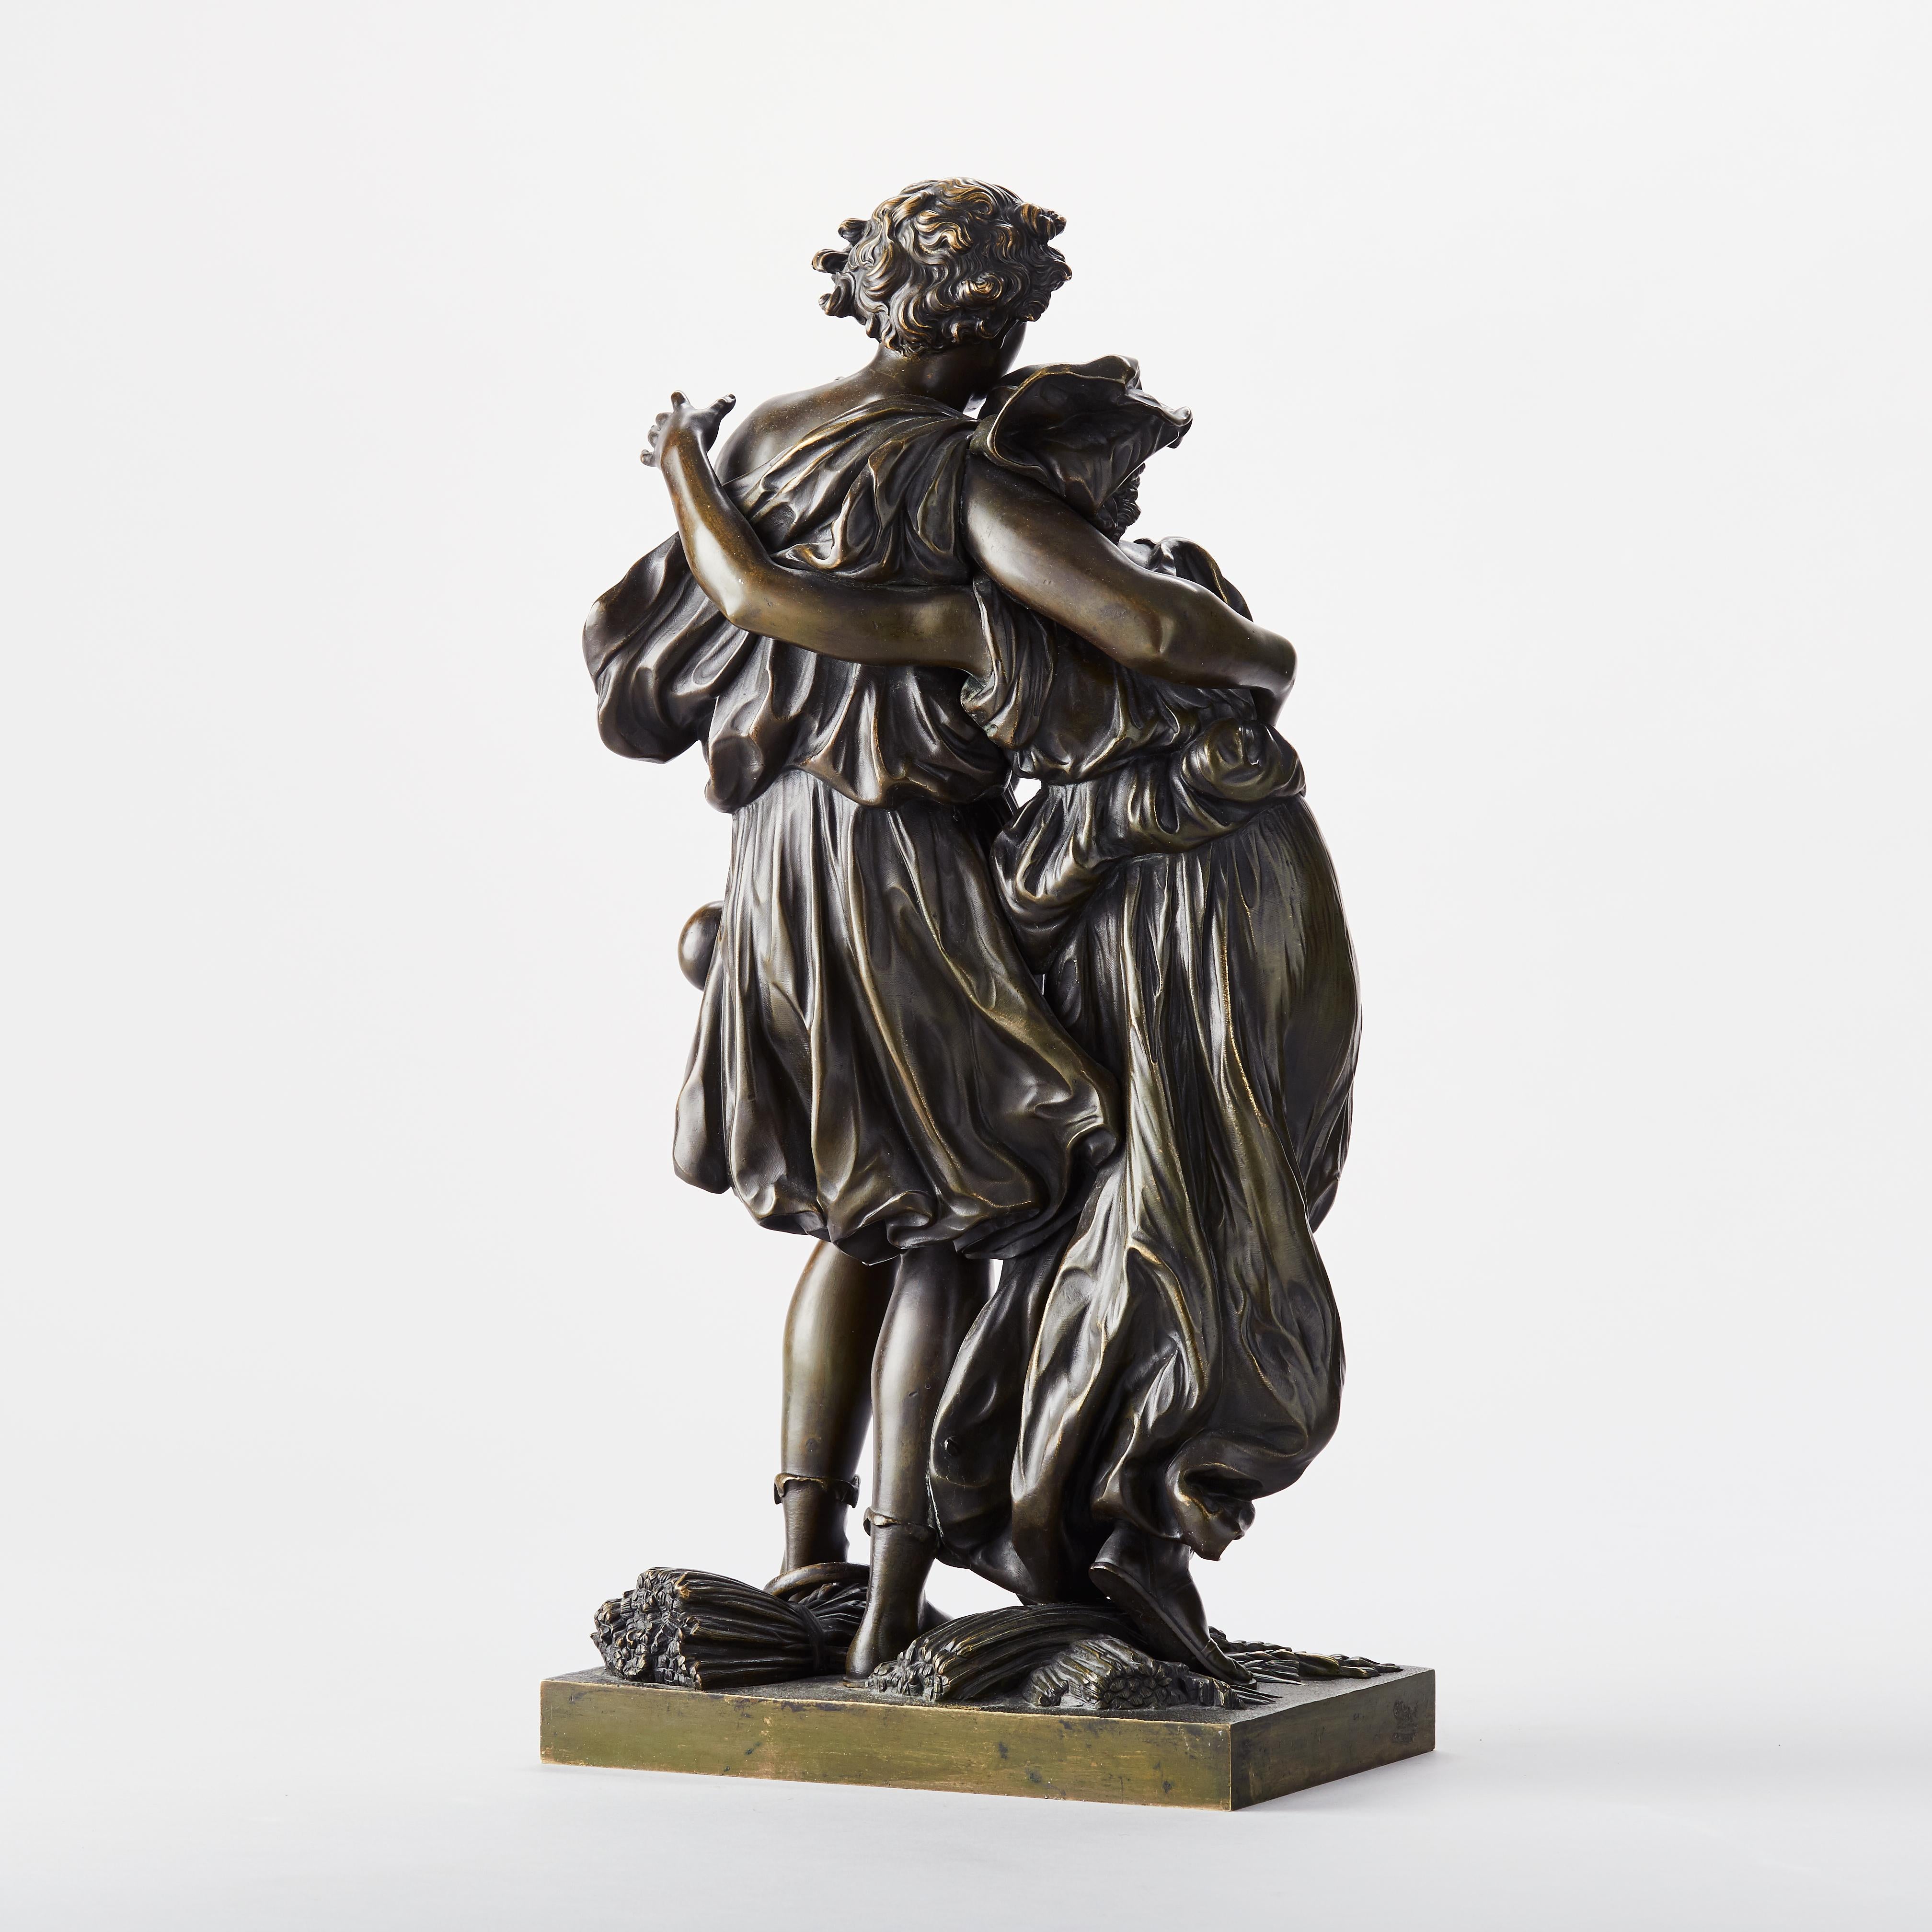 Allegorical figural group of autumn and summer bronze. By Etienne Henri Dumaige (1830-1888), not signed. The sculpture depicting a man (Autumn) supporting a woman (Summer) on a rectangular base.